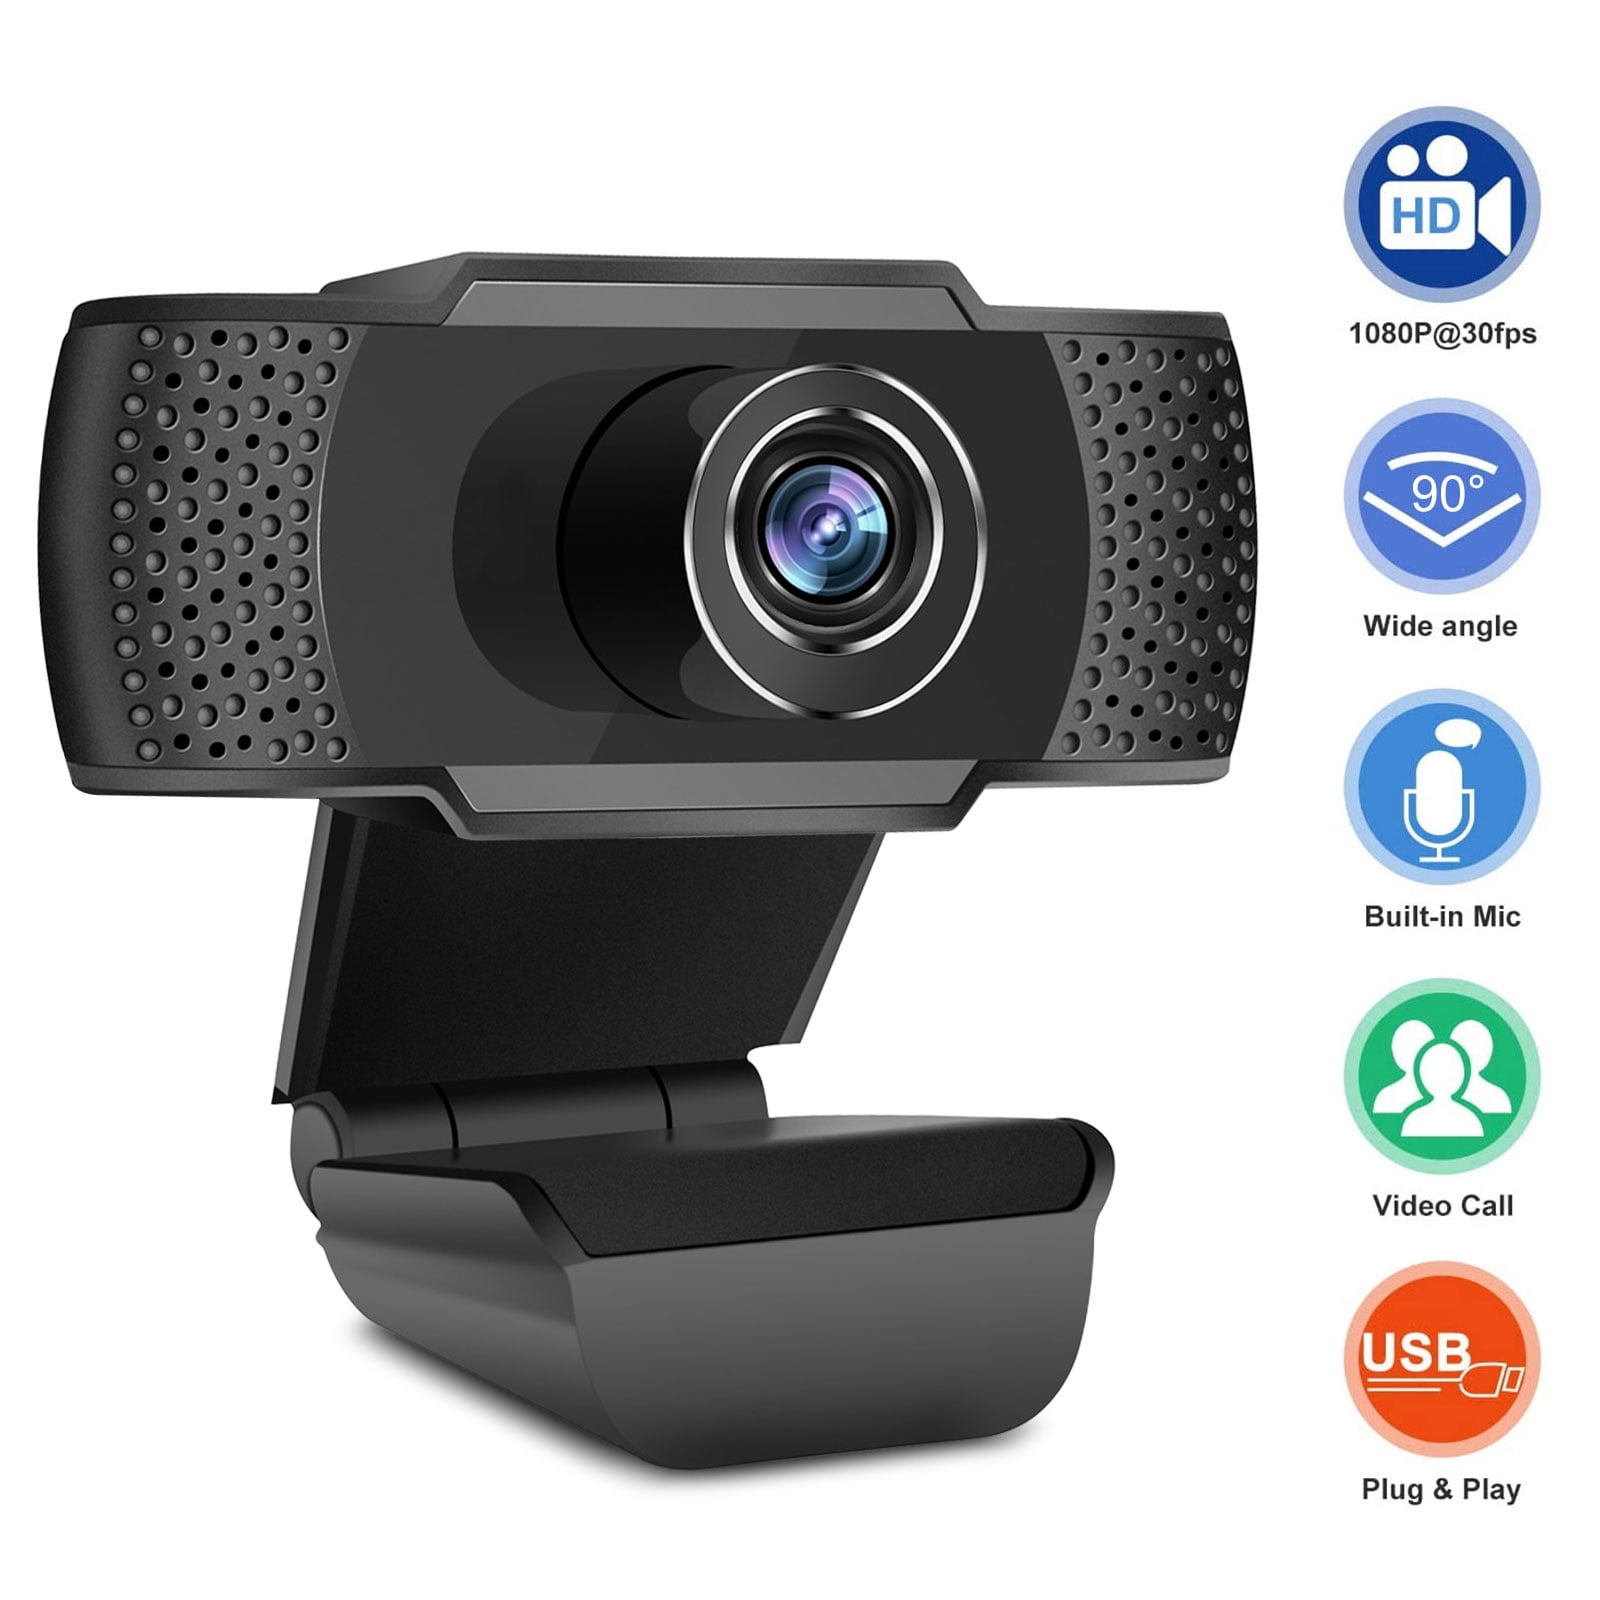 Conference Study Video Calling 1080p USB Webcam with Microphone for Computers PC Laptop Desktop Streaming USB Plug and Play